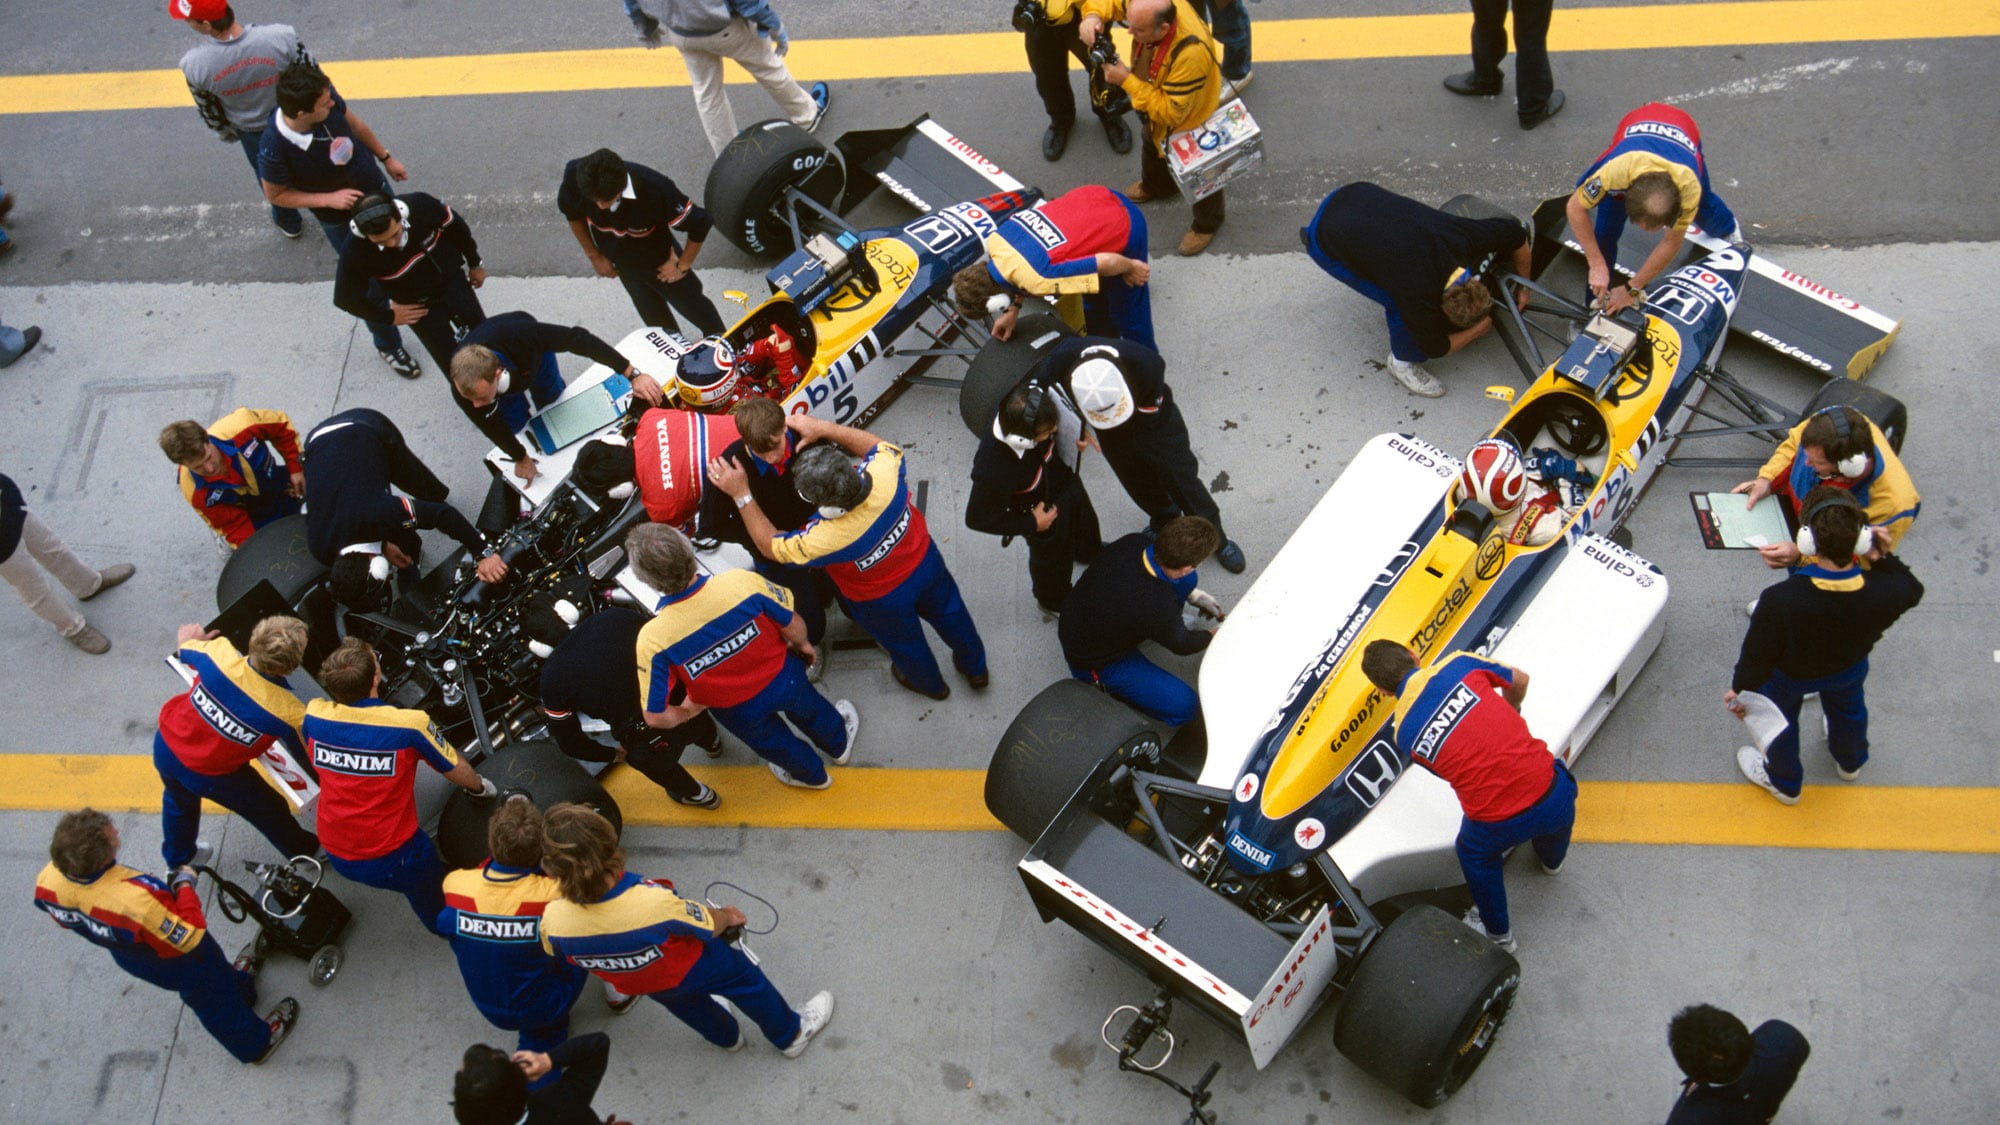 Overhead view of Mansell and Piquet in Williams FW11s at 1987 Hungarian GP